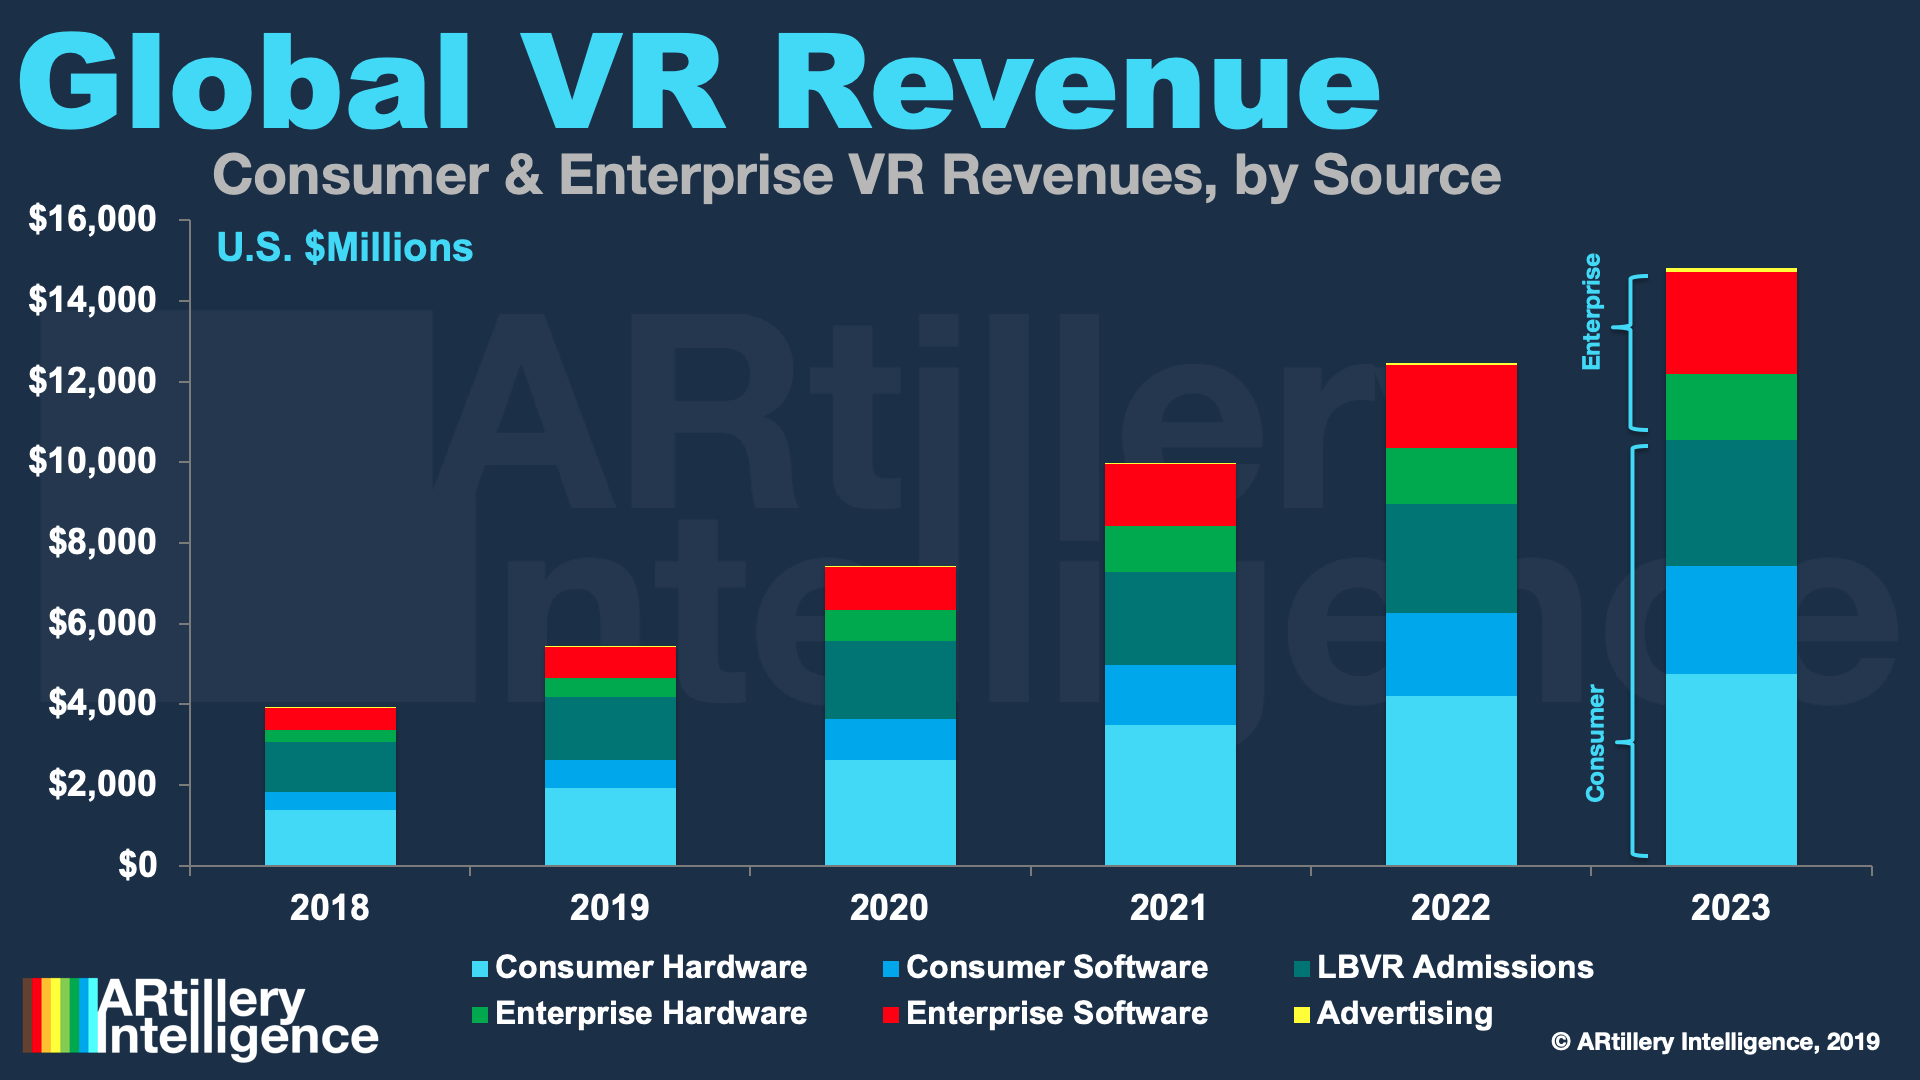 Investment in augmented reality and virtual reality is expected to increase in the coming year.